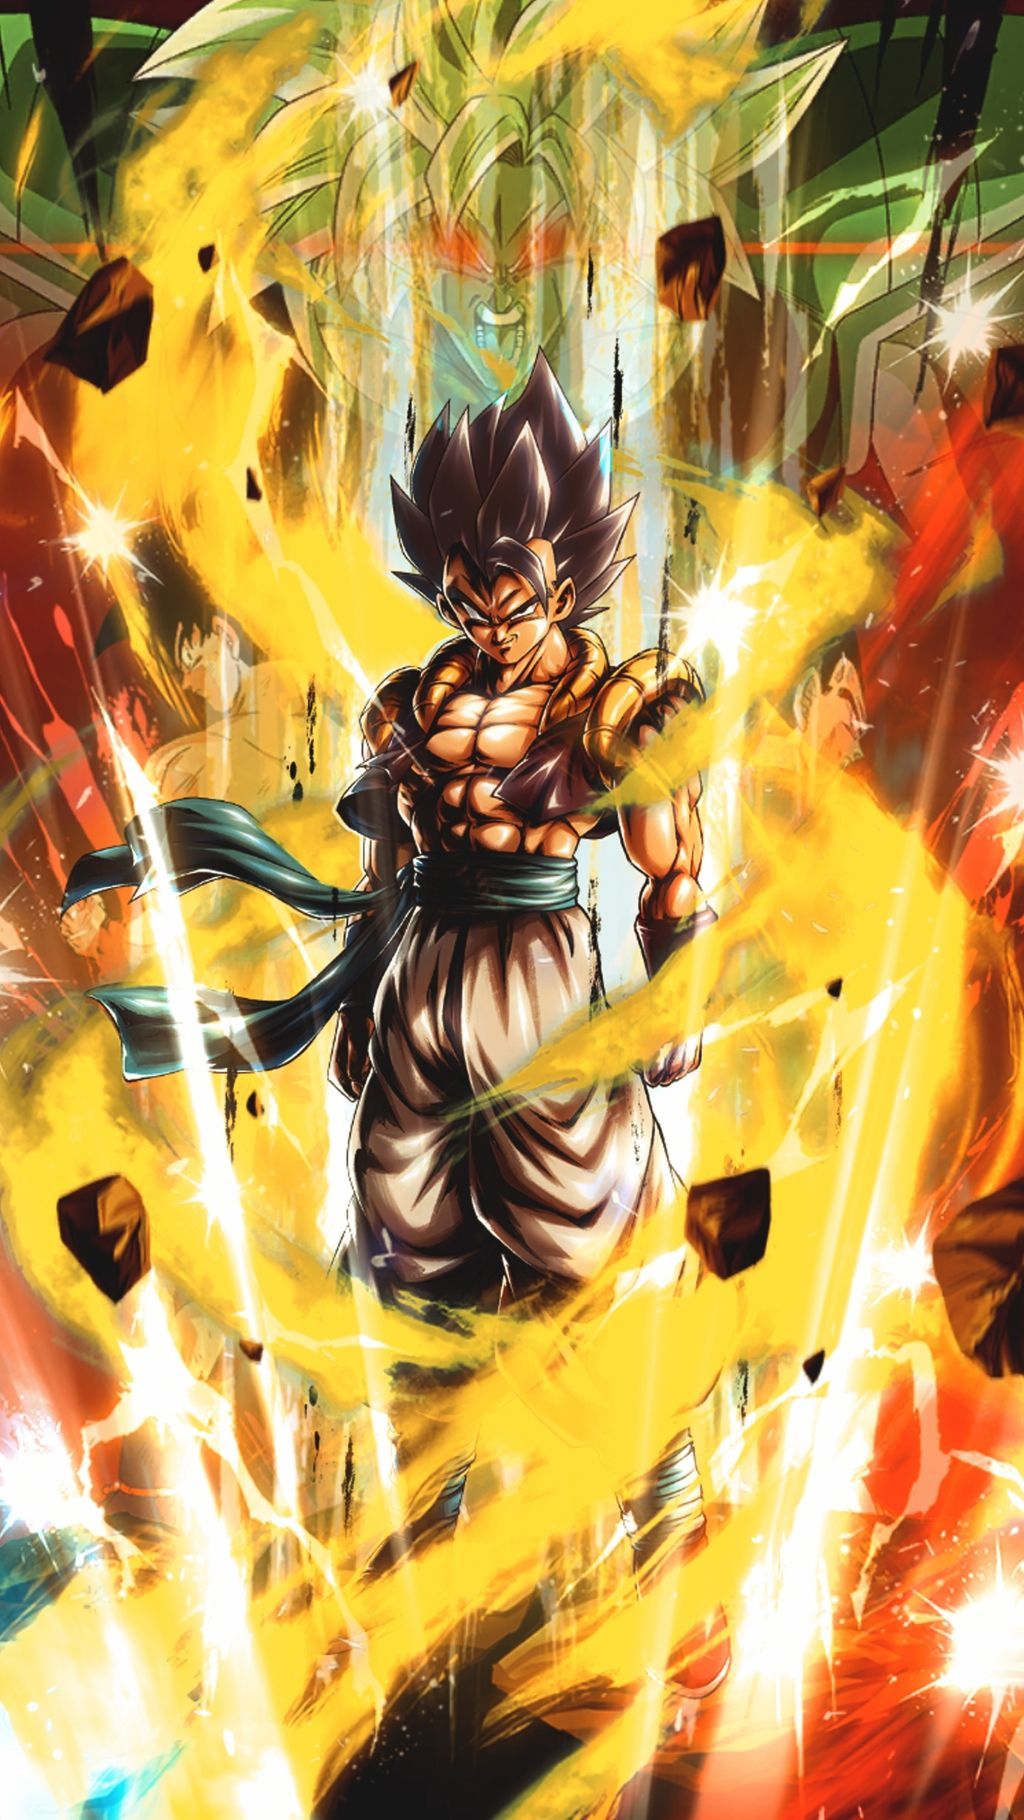 4K Wallpaper of DBZ and Super for Phones. Dragon ball super manga, Anime dragon ball super, Dragon ball